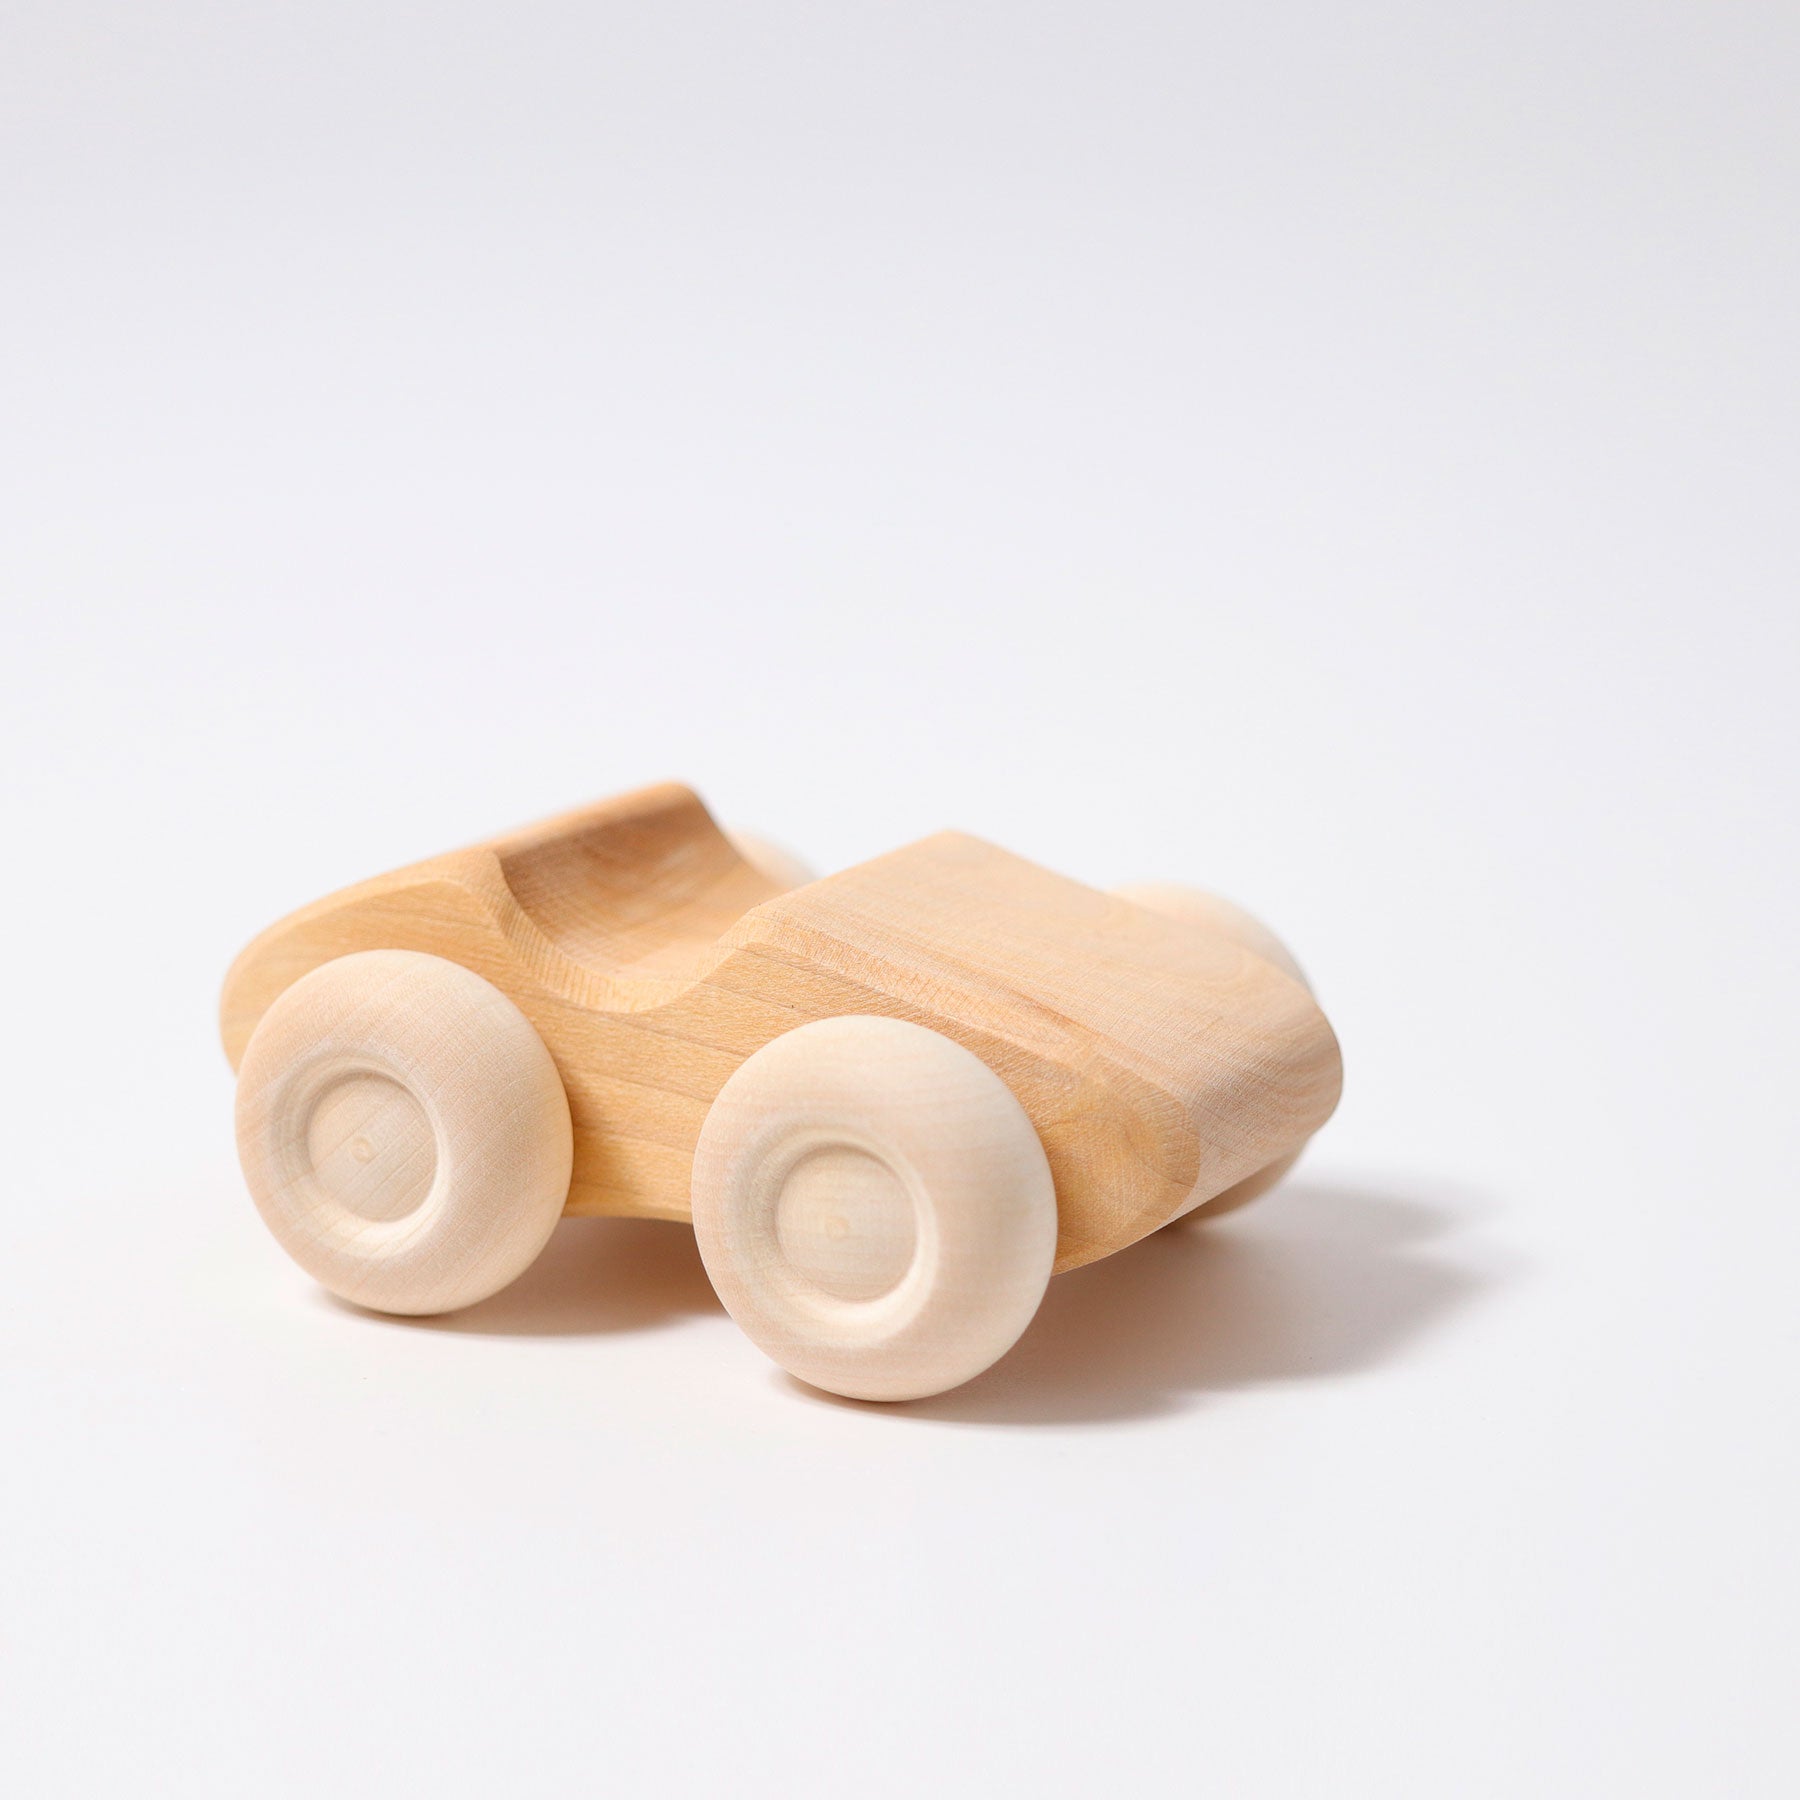 Set of 6 wooden cars